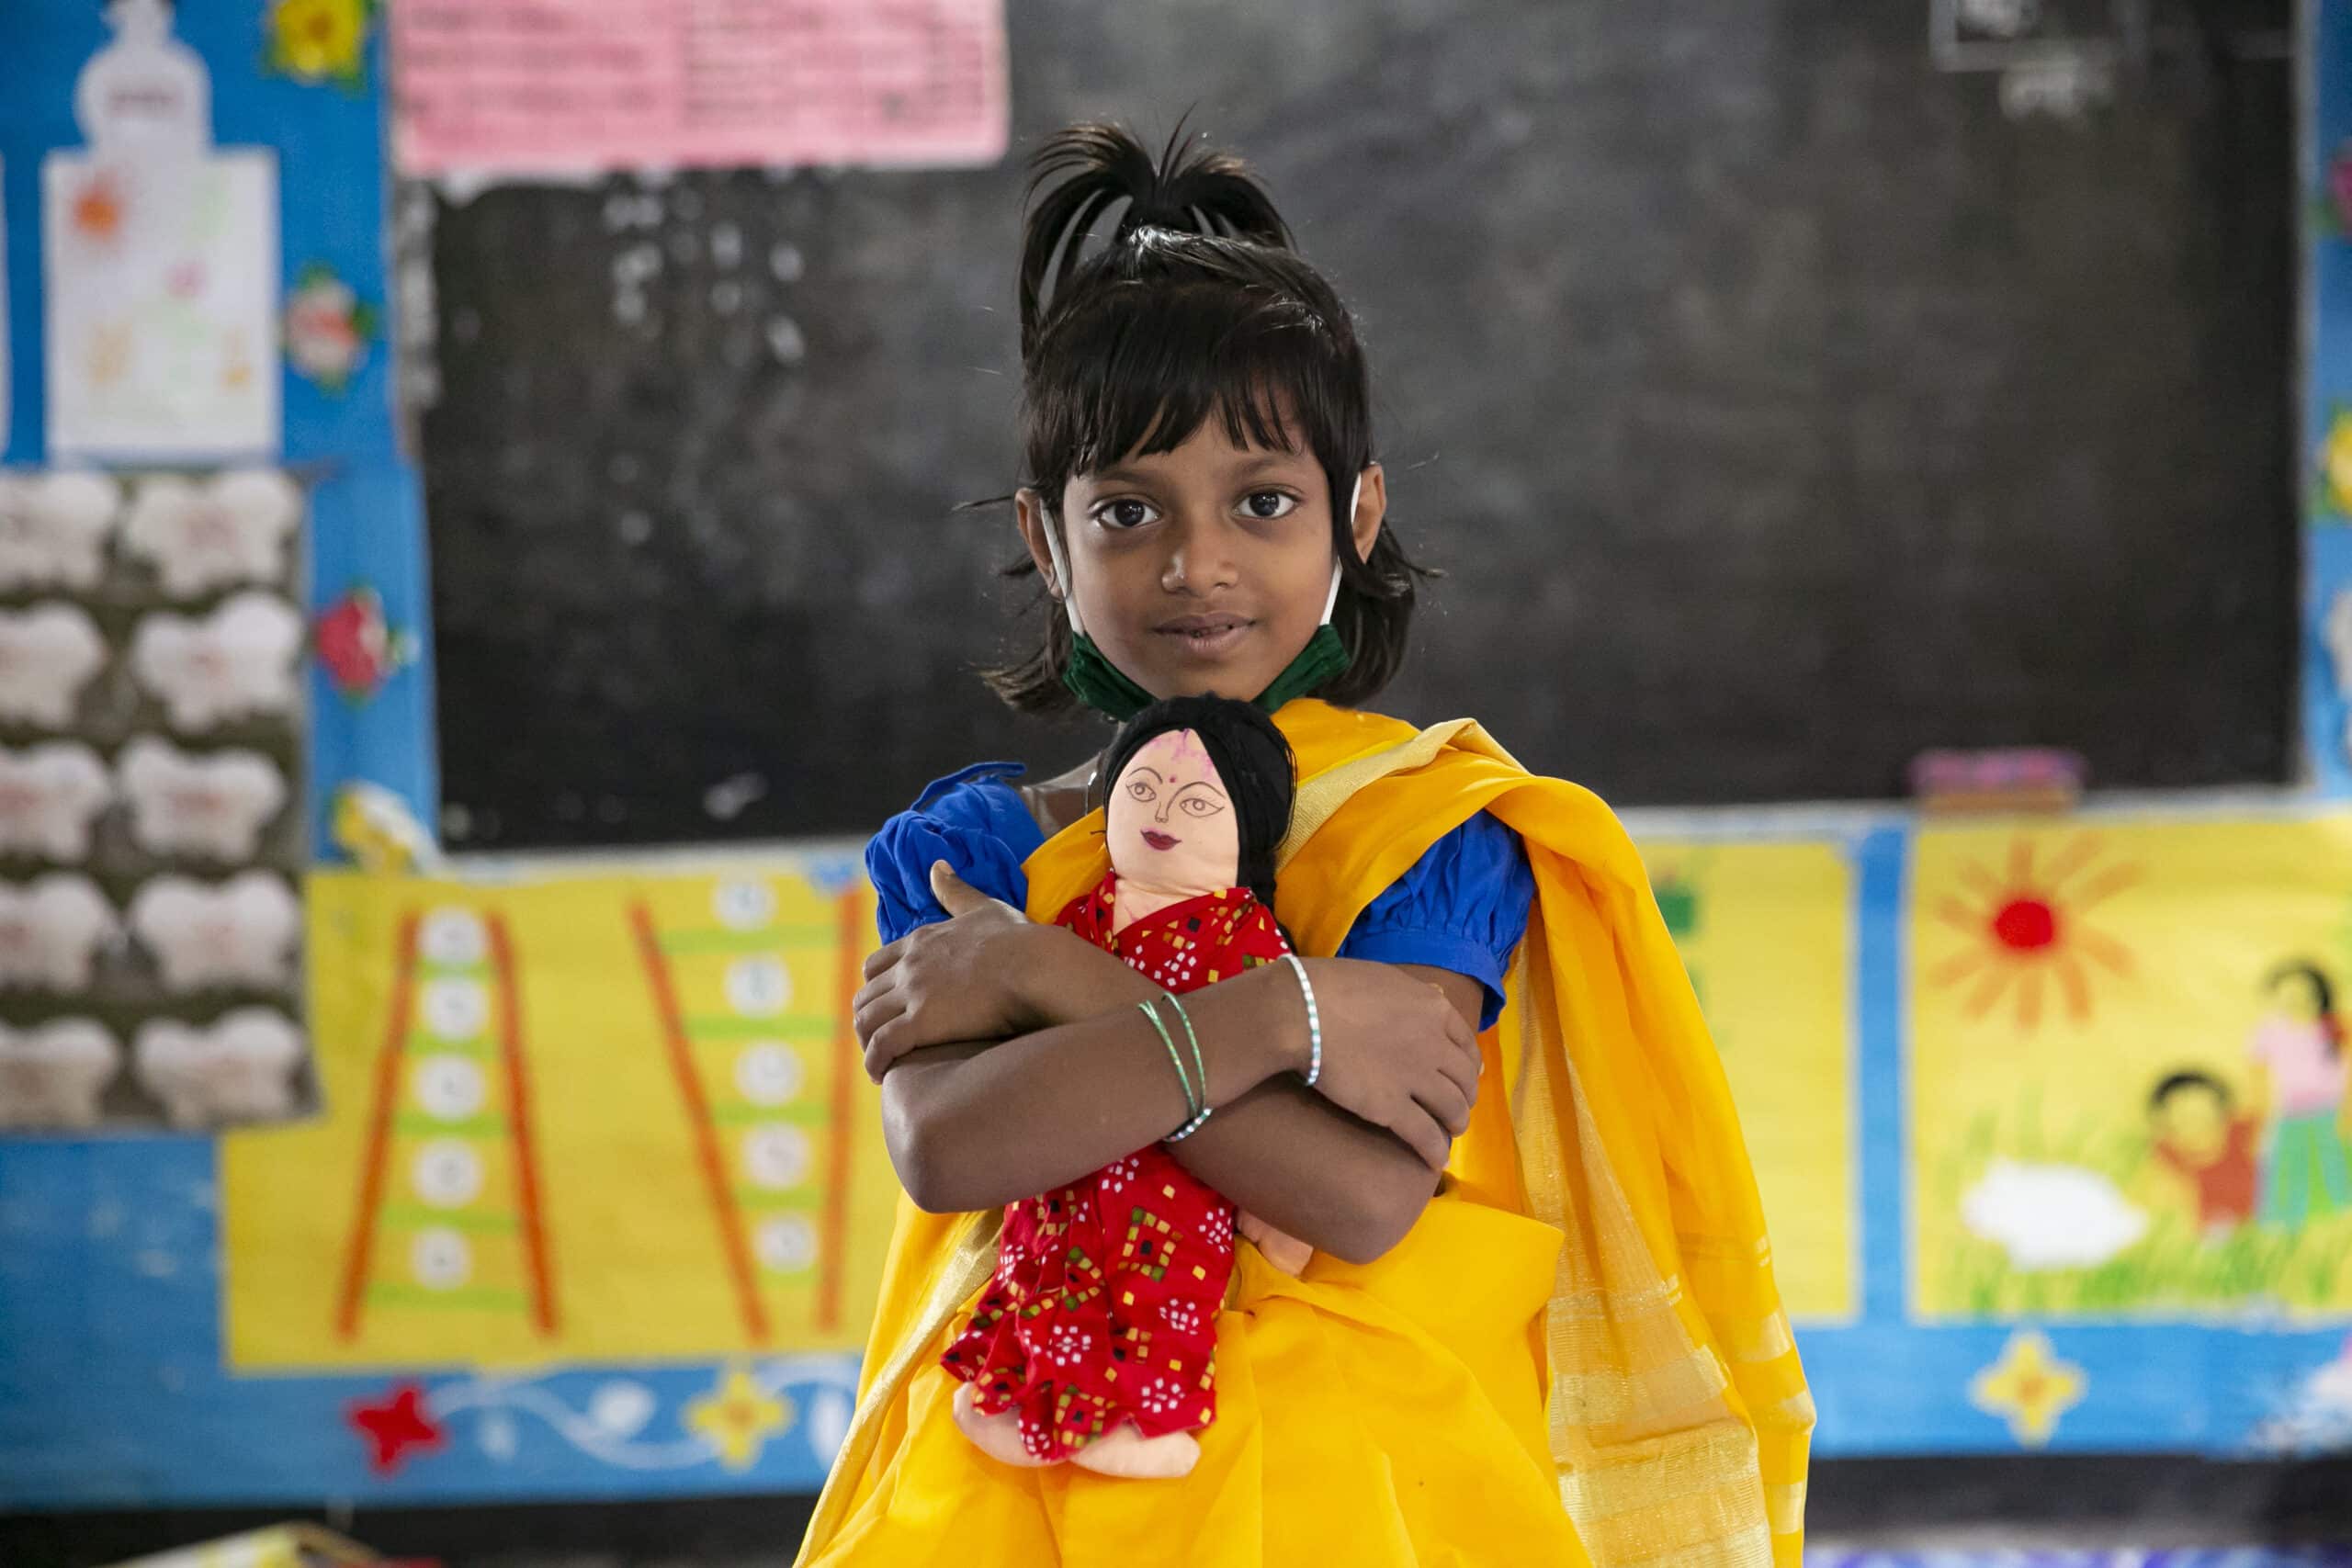 Amina, 6, holding a doll in her classroom